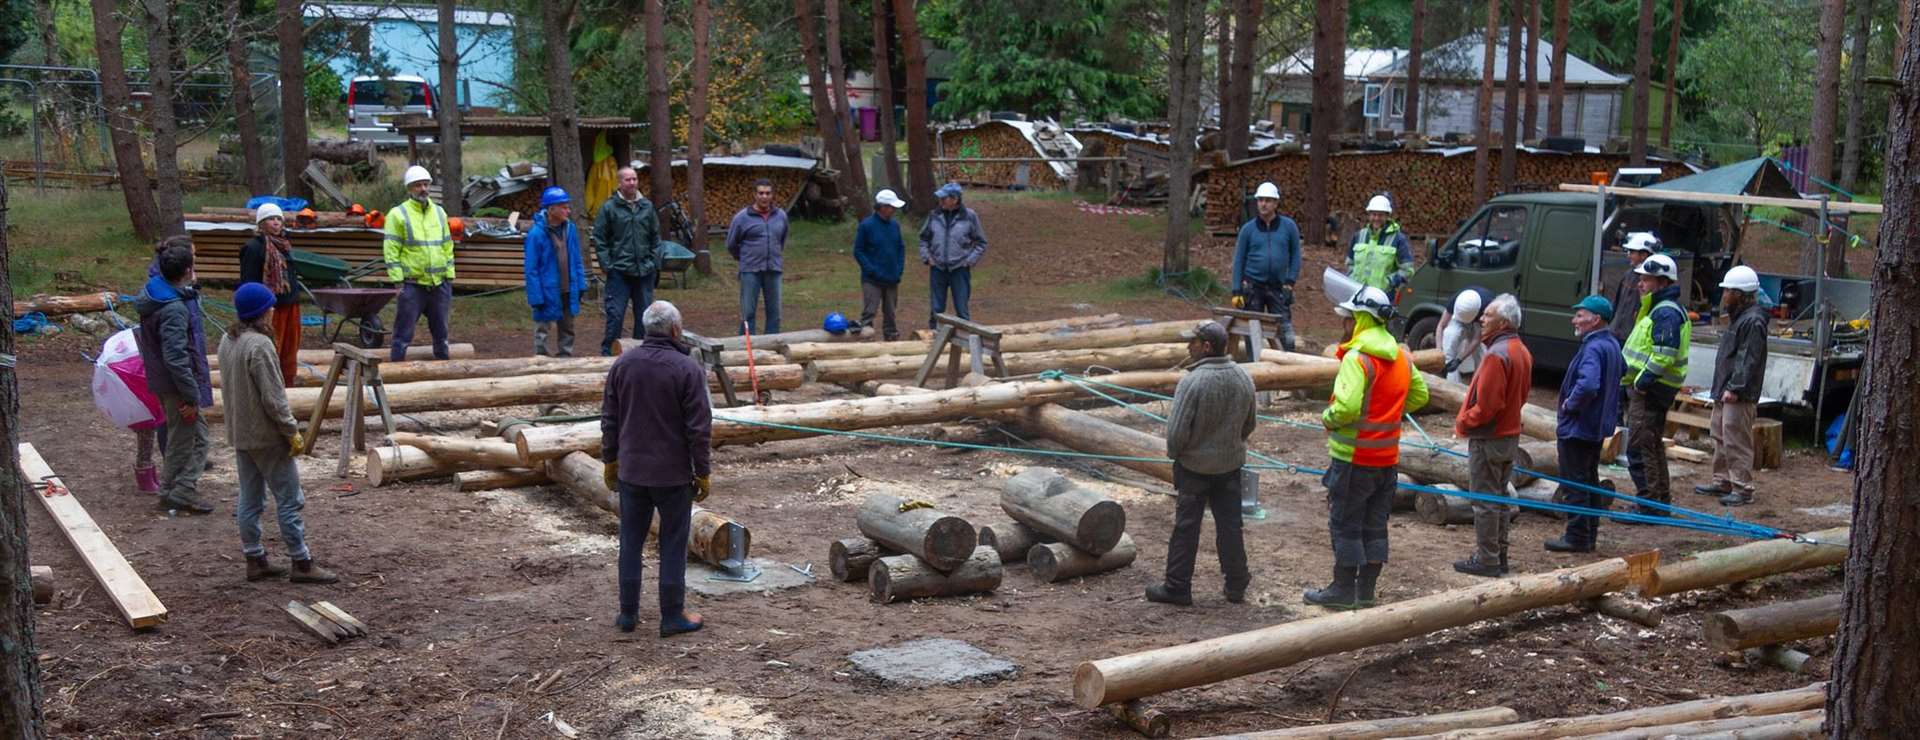 Gathering to help raise the first large wooden frame onto the foundations. Picture by Hugo V.M. Klip